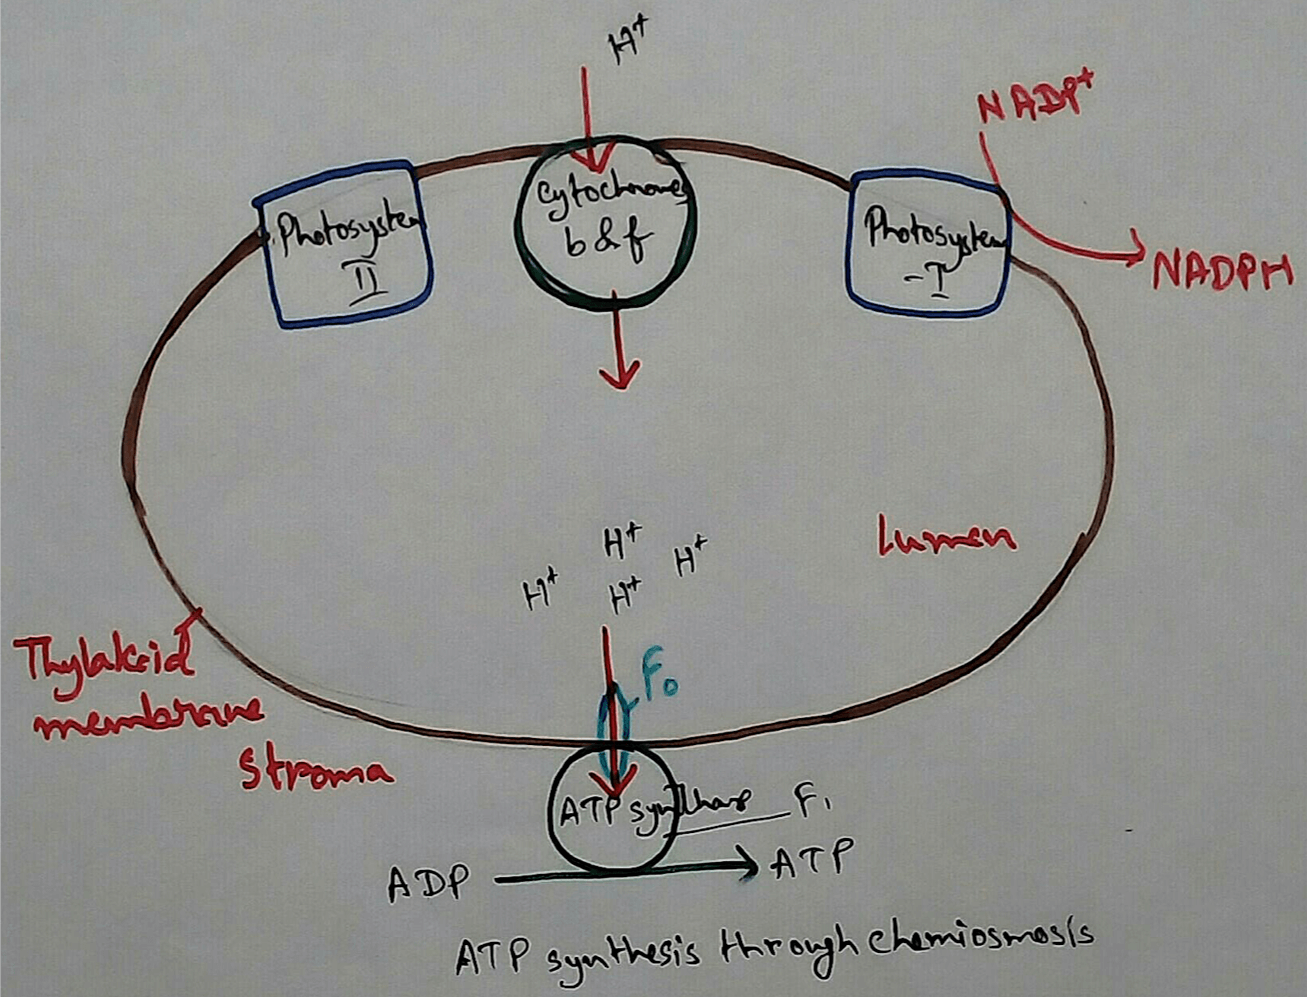 Chemiosmotic theory- Piter D. Mitchell proposed the chemiosmotic hypothesis in 1961 and this theory suggest essentiality that most adenosine triphosphate phosphate (ATP) cells comes from the electrochemical gradient across the inner membrane of mitochondriaby using energy